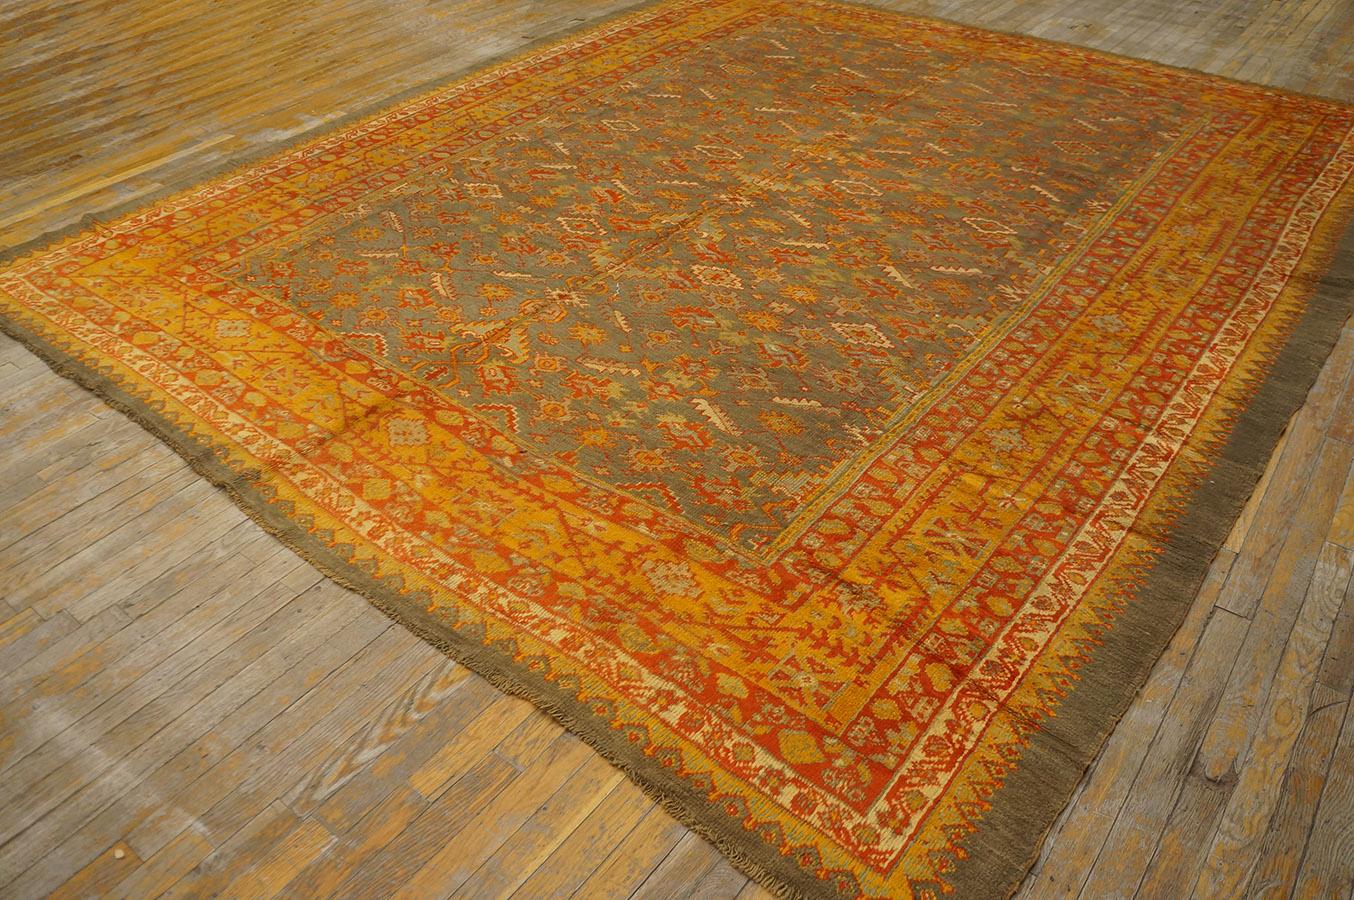 Hand-Knotted Late 19th Century Turkish Oushak Carpet ( 9'7'' x 11'3'' - 292 x 343 cm) For Sale